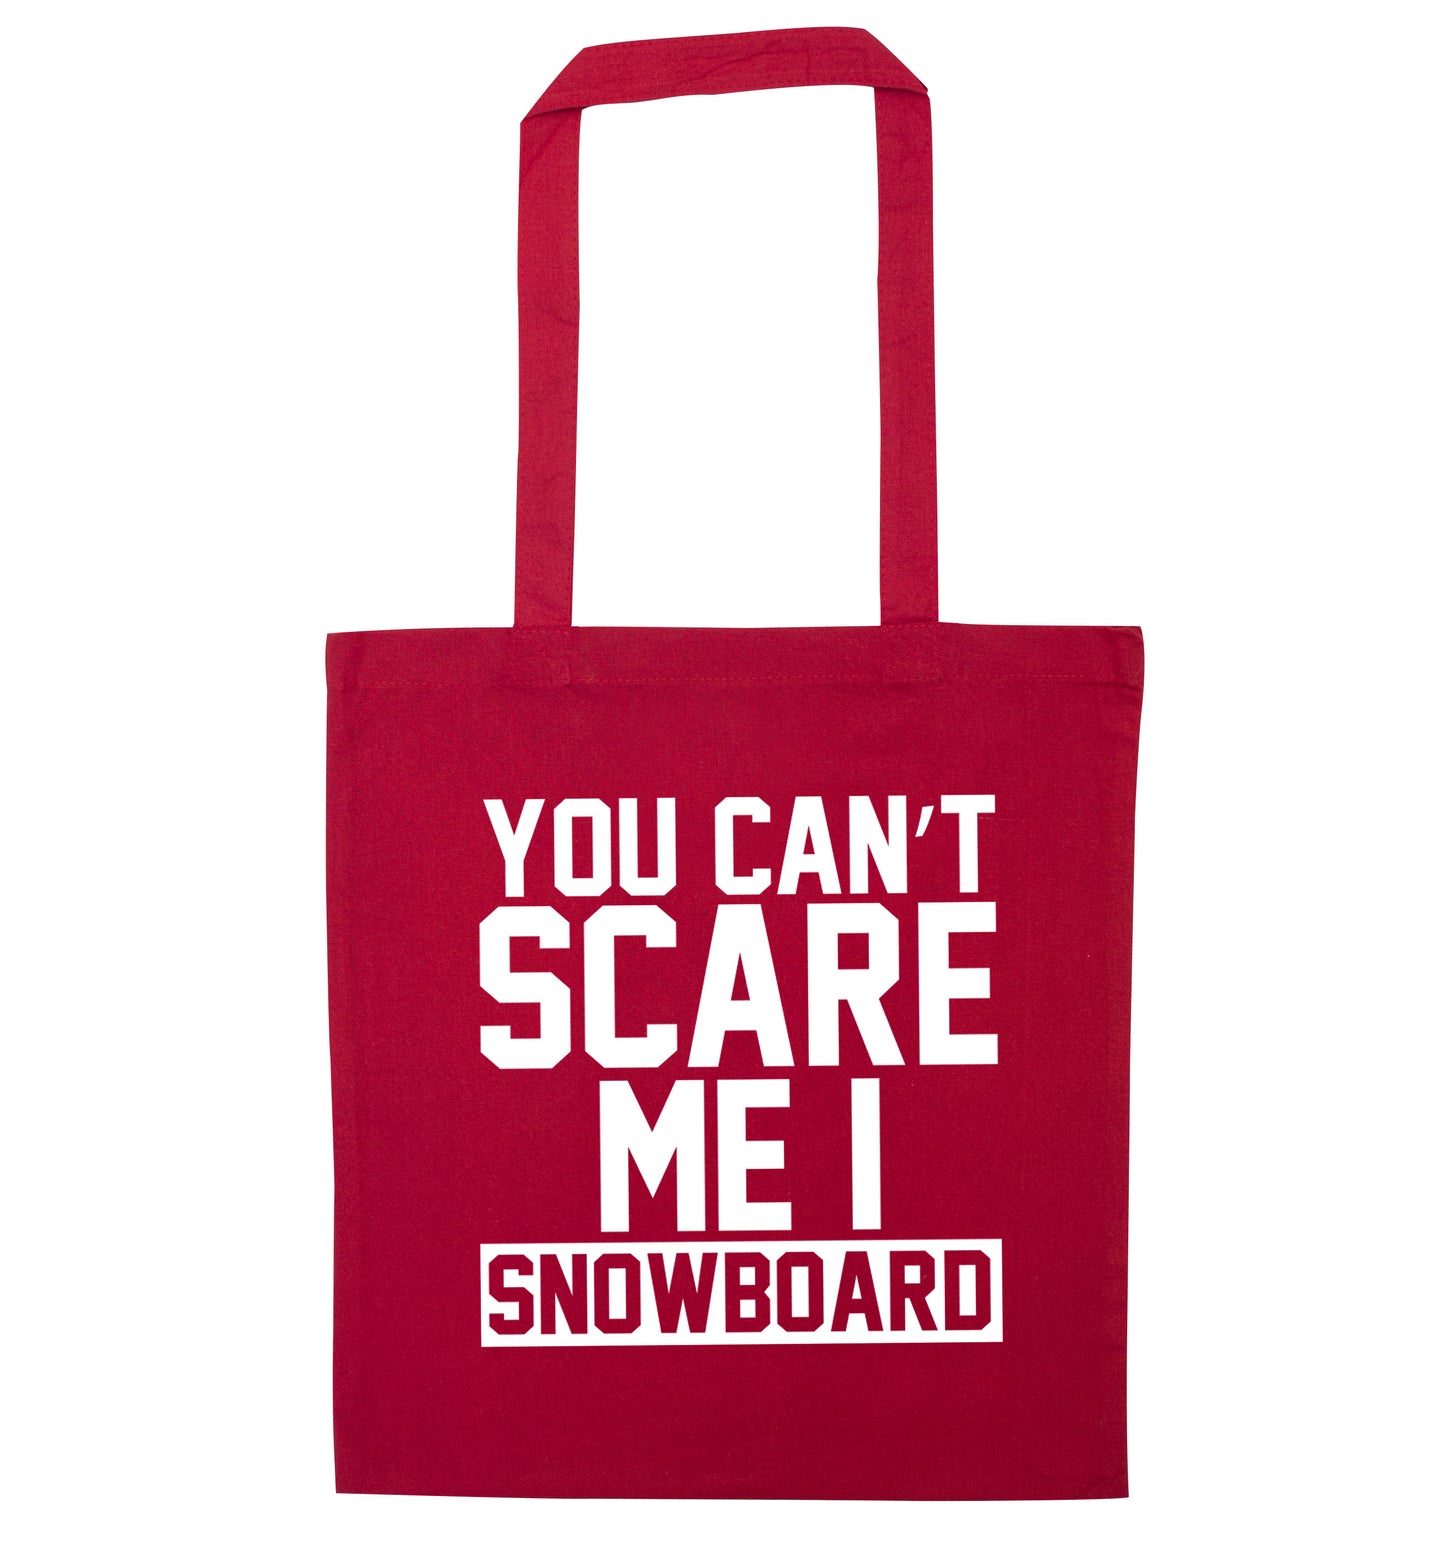 You can't scare me I snowboard red tote bag